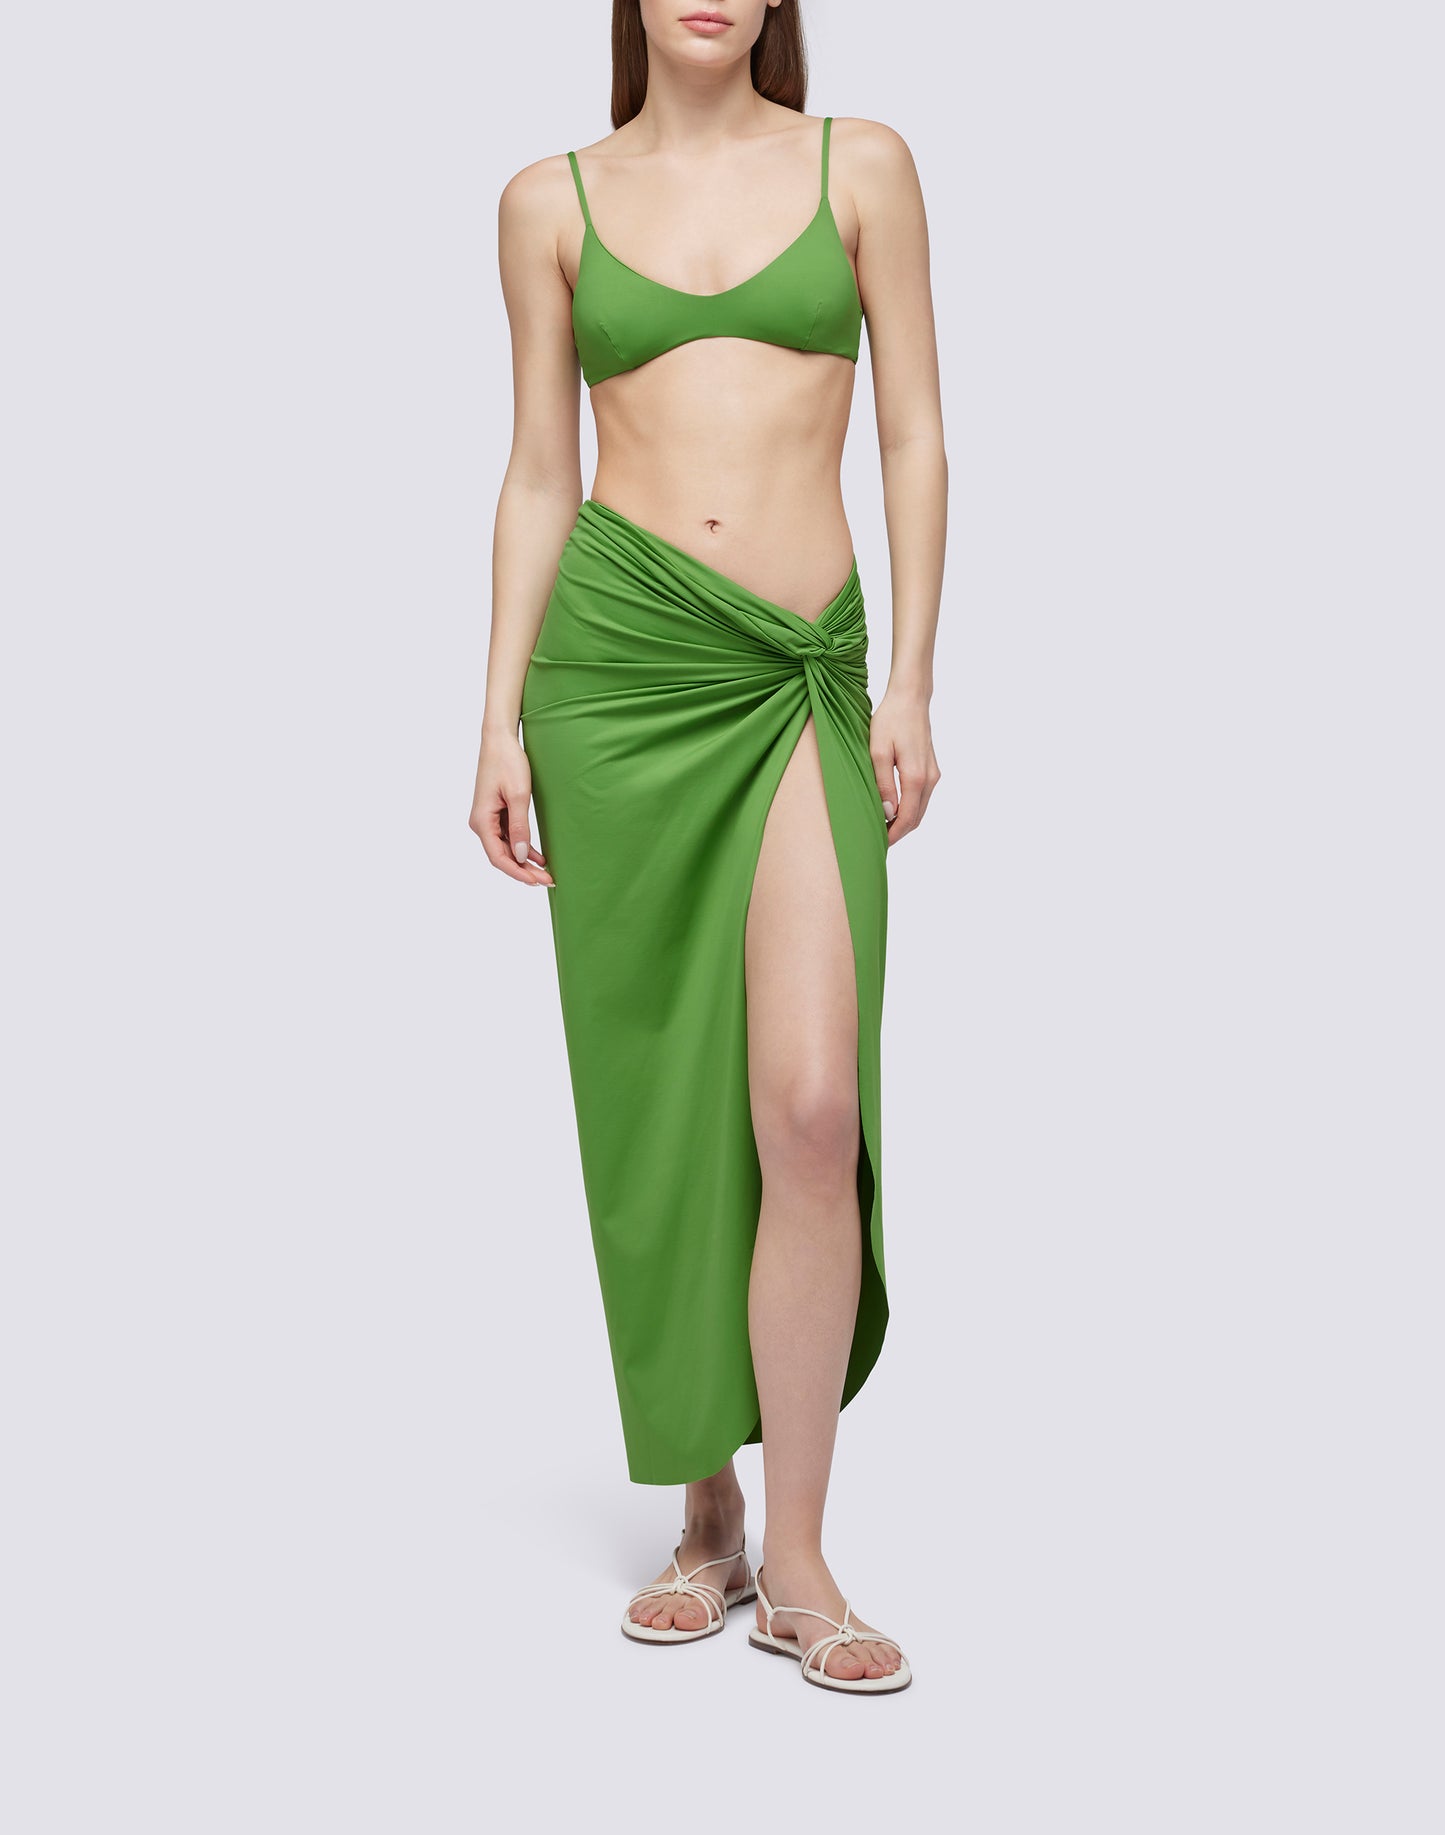 PAREO SKIRT IN WRINKLED EFFECT SARONG